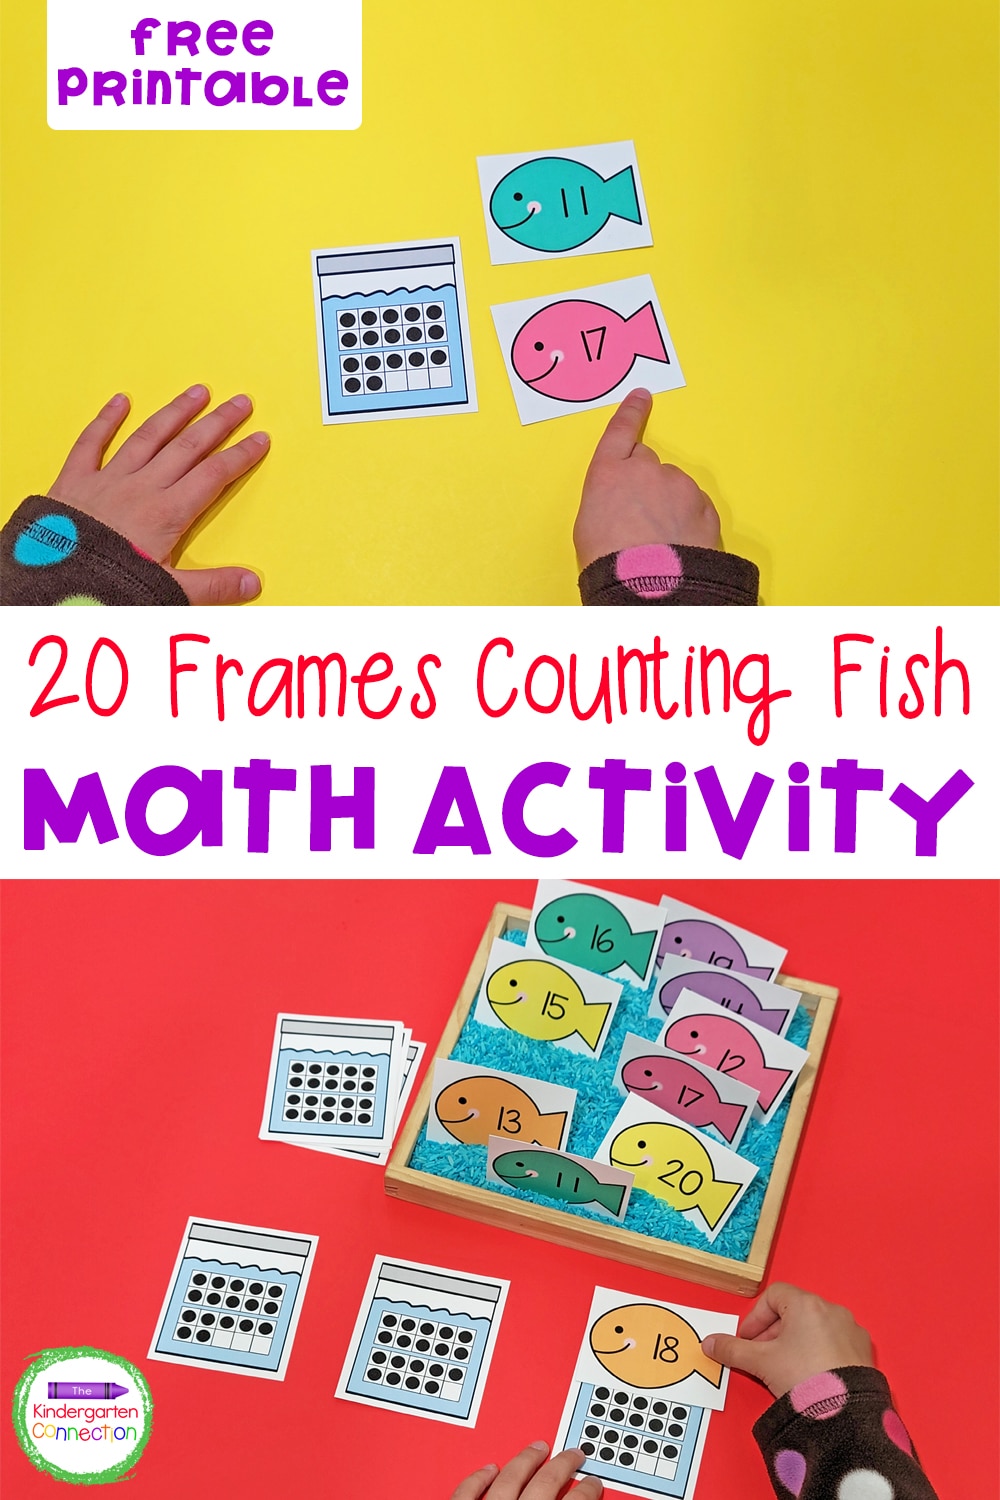 Students will love playing this free 20 Frames Counting Fish Game to practice numbers 11-20 with twenty frames!